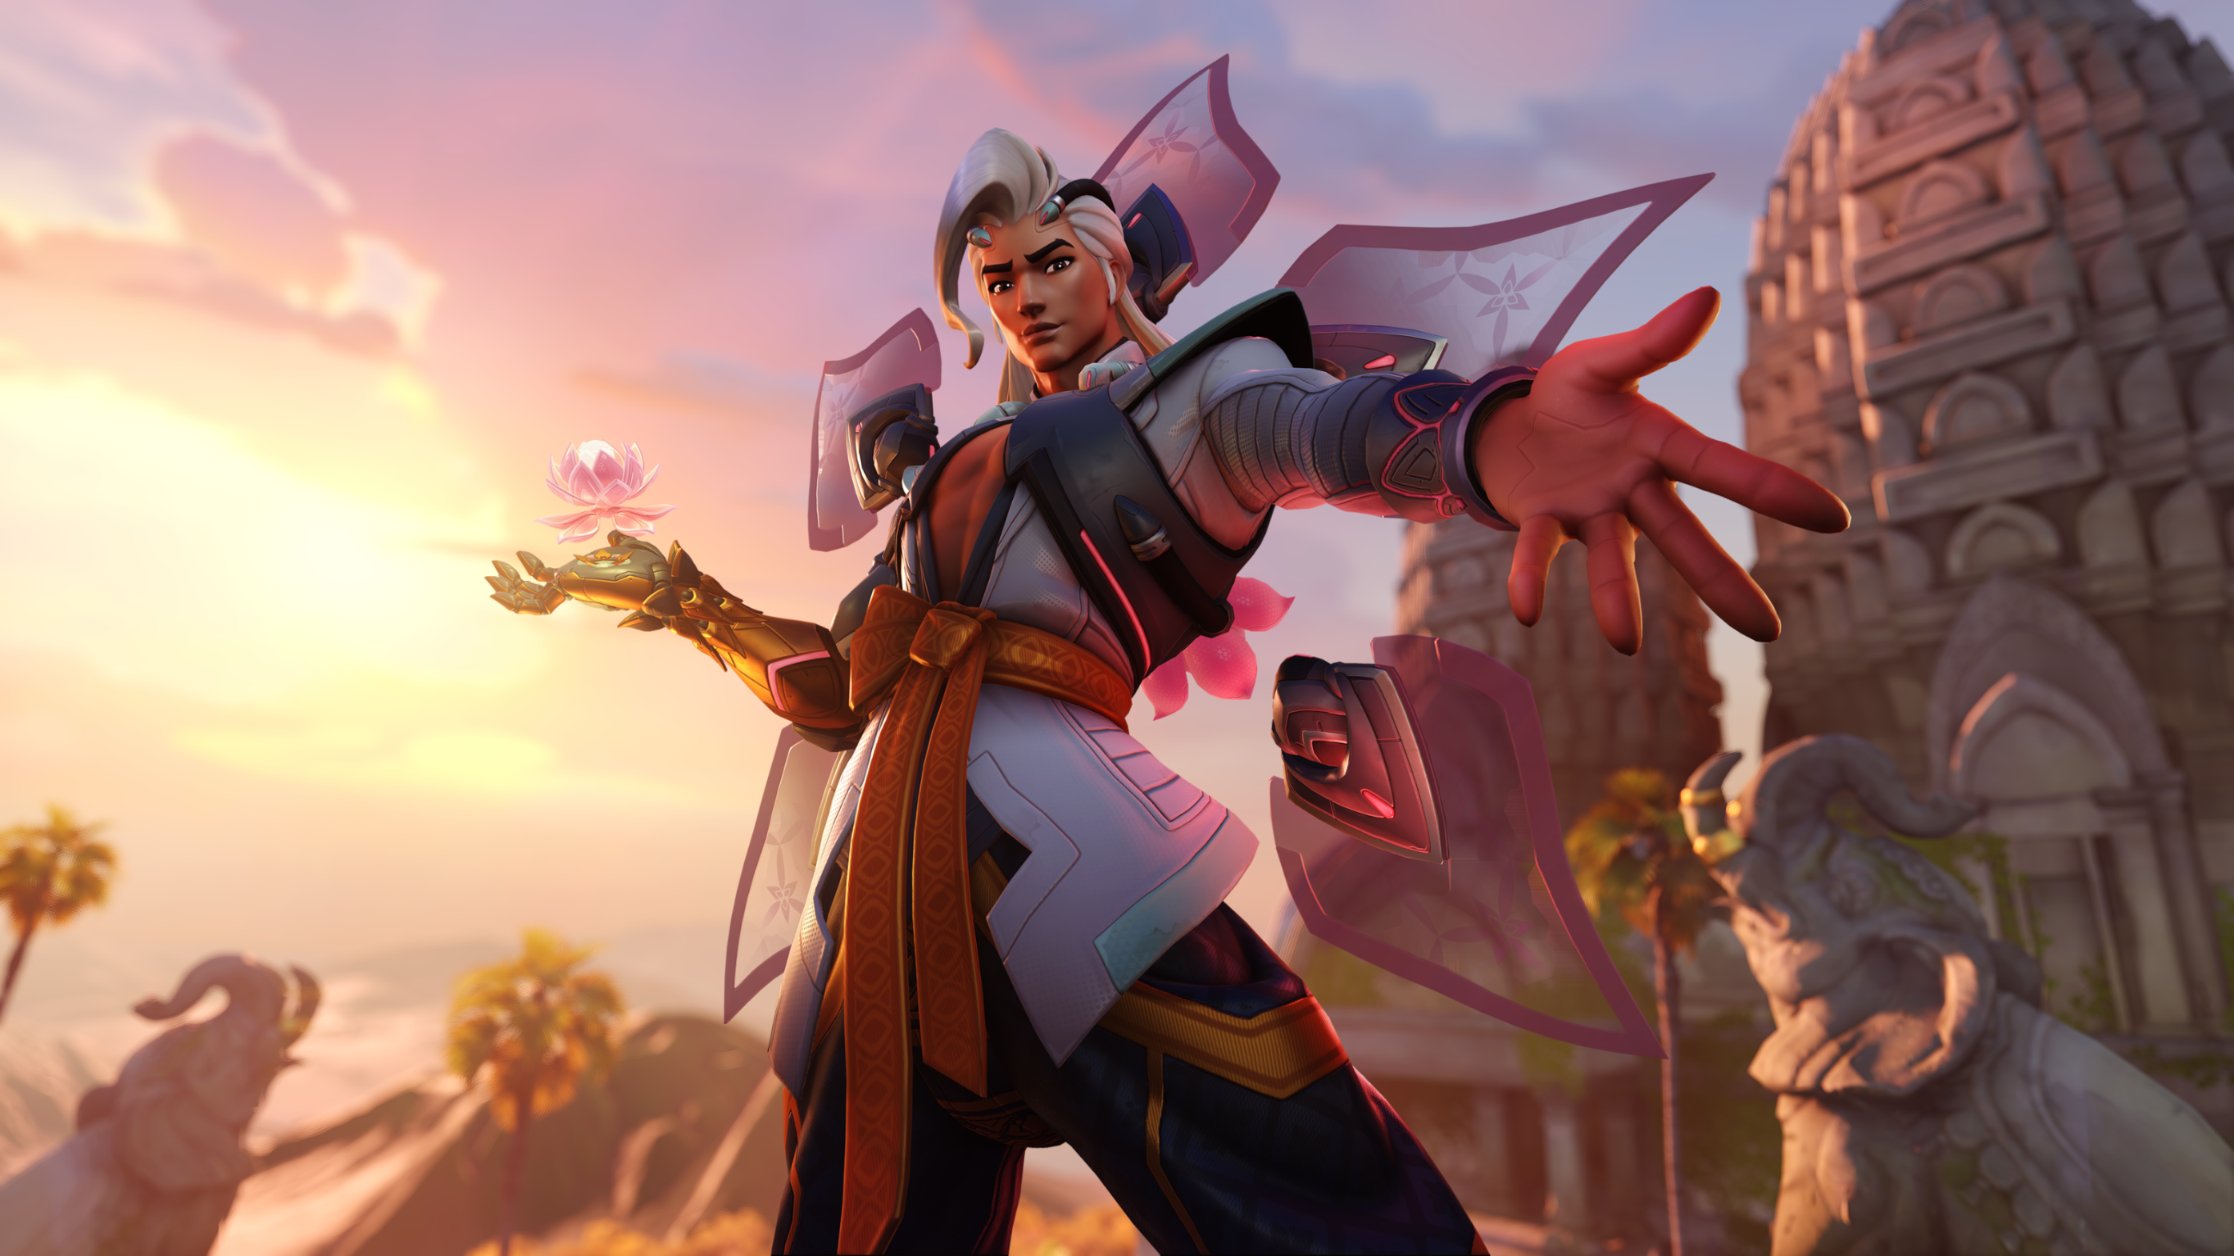  Overwatch 2's new support heals with flowers and can yank you out of danger 